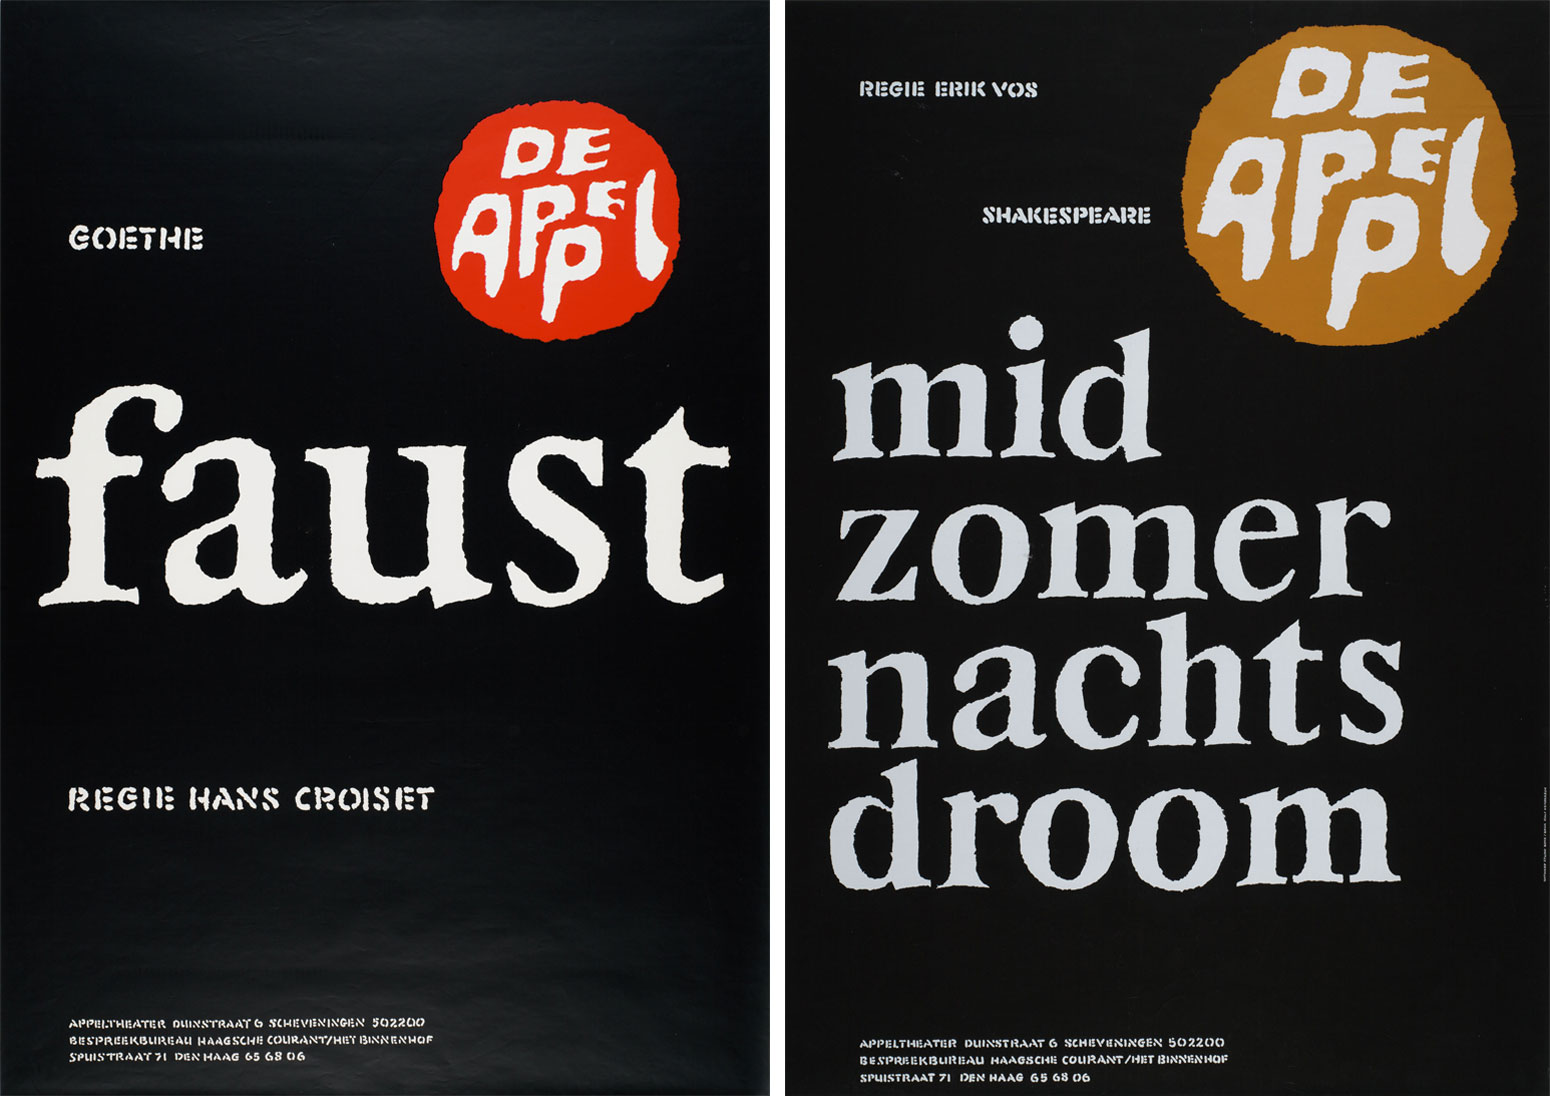 Jan-Bons-affiches-faust-mist-zomer-1985-1986